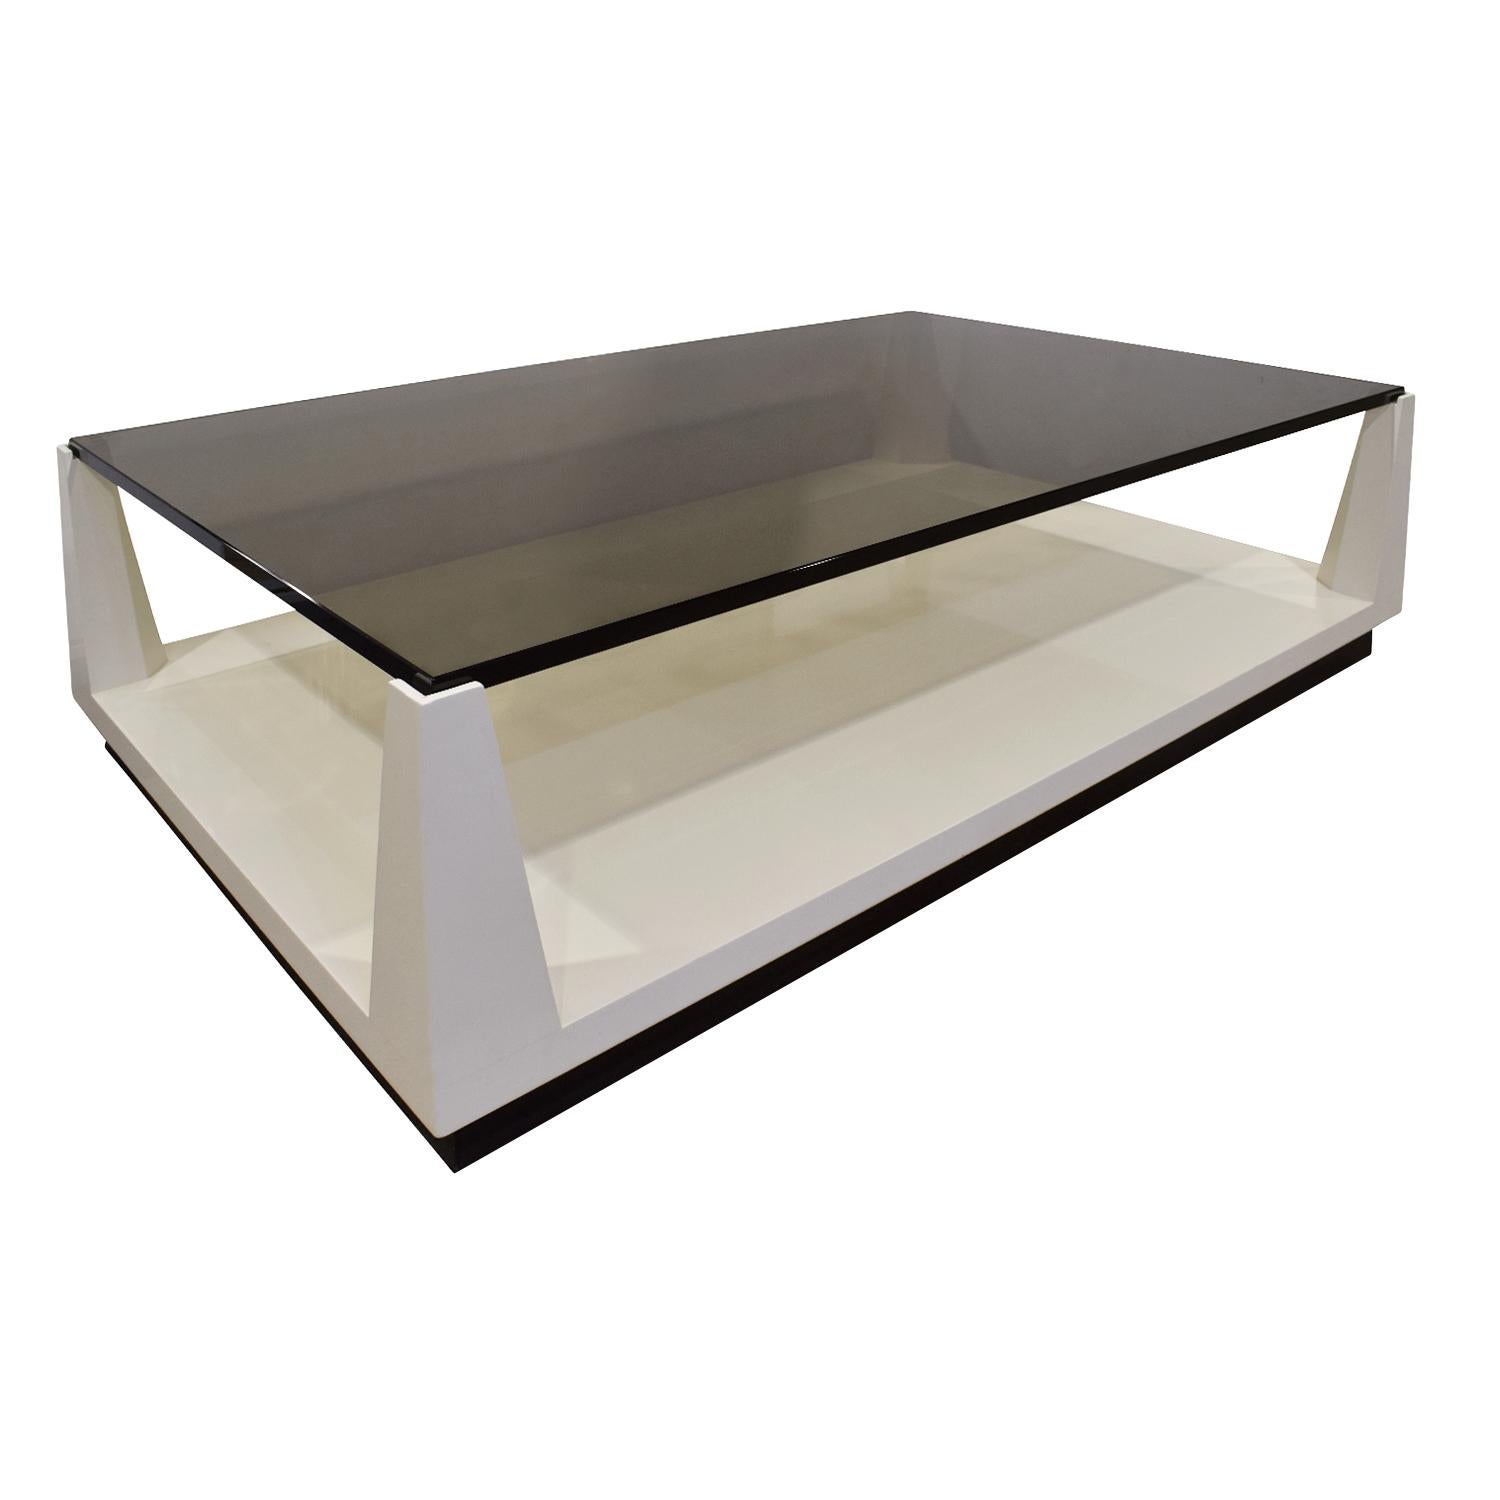 Lacquered coffee table with raised smoked glass top by Tommi Parzinger for Parzinger Originals, American 1970's. This came from an apartment decorated by Donald Cameron, Tommi Parzinger’s business and life partner. It is on hidden castors.